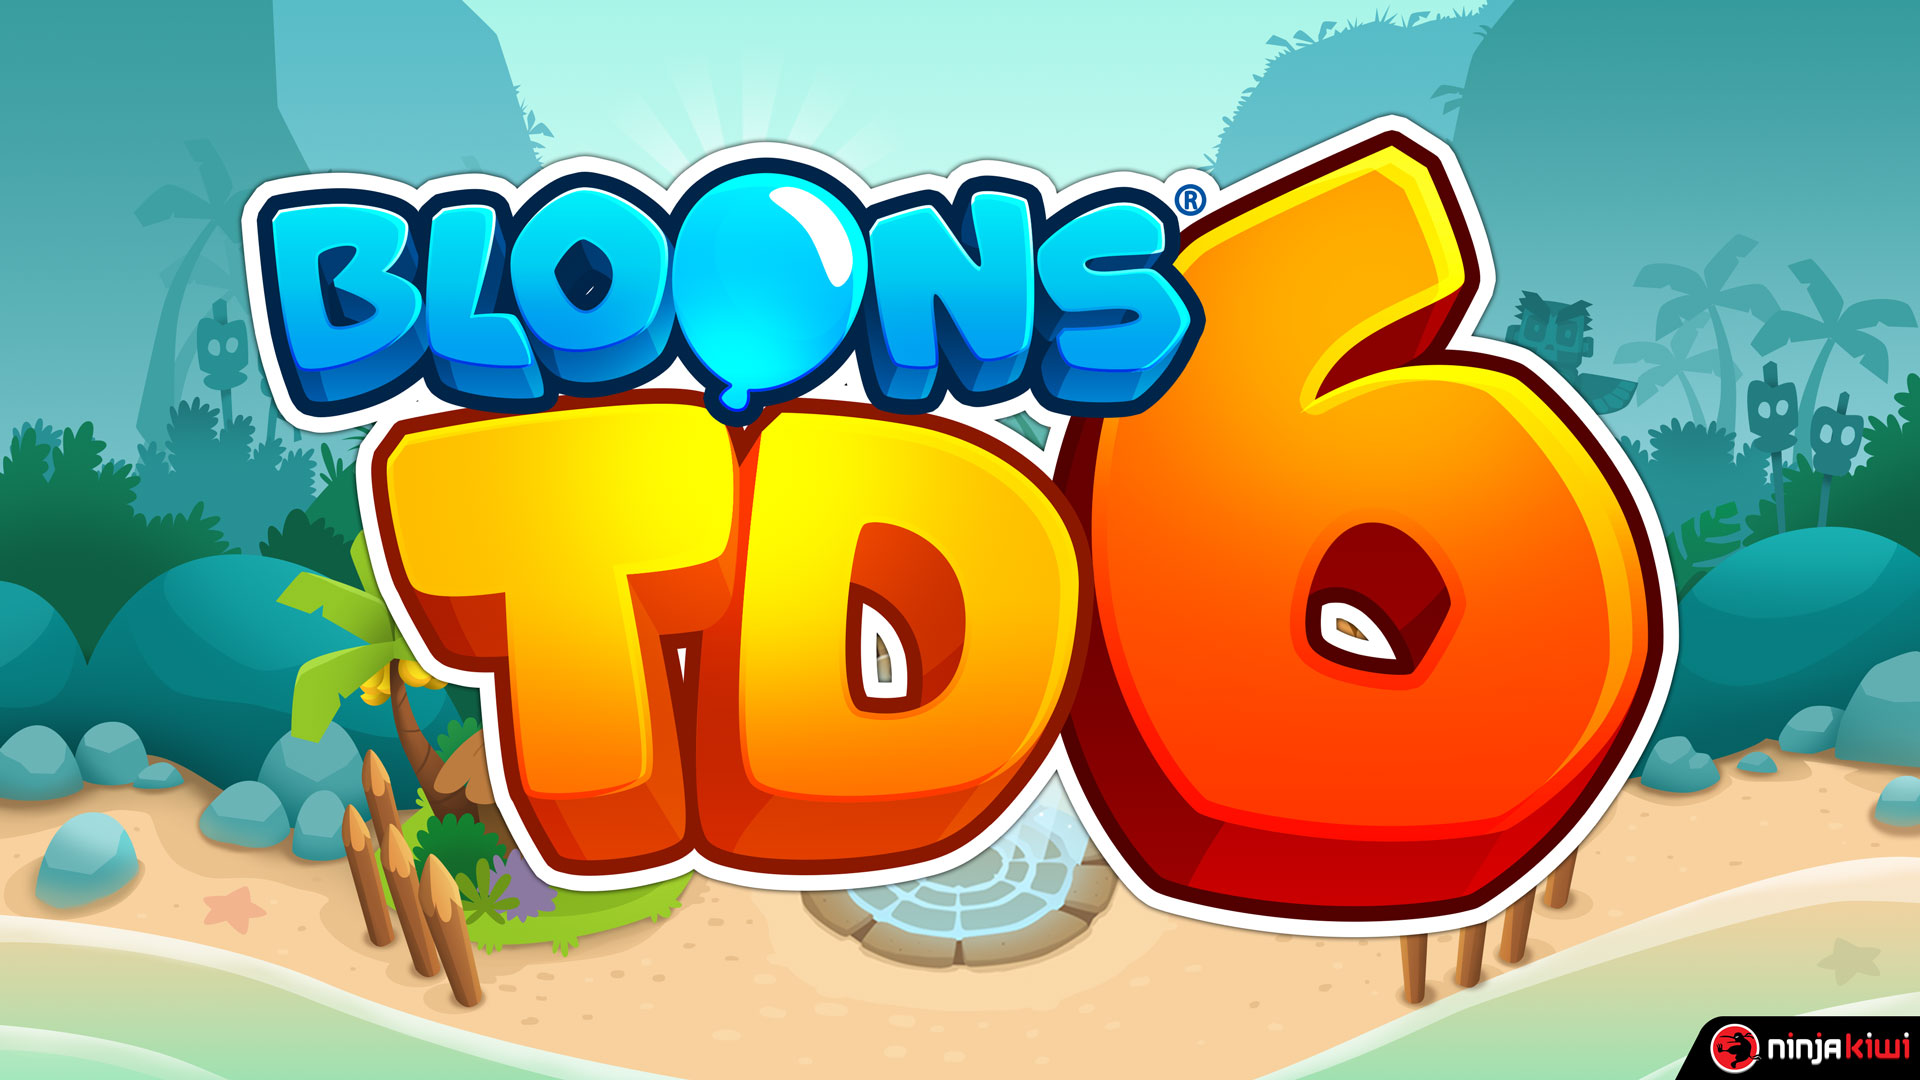 HD Bloons TD 6 desktop wallpaper with game logo on a tropical backdrop.